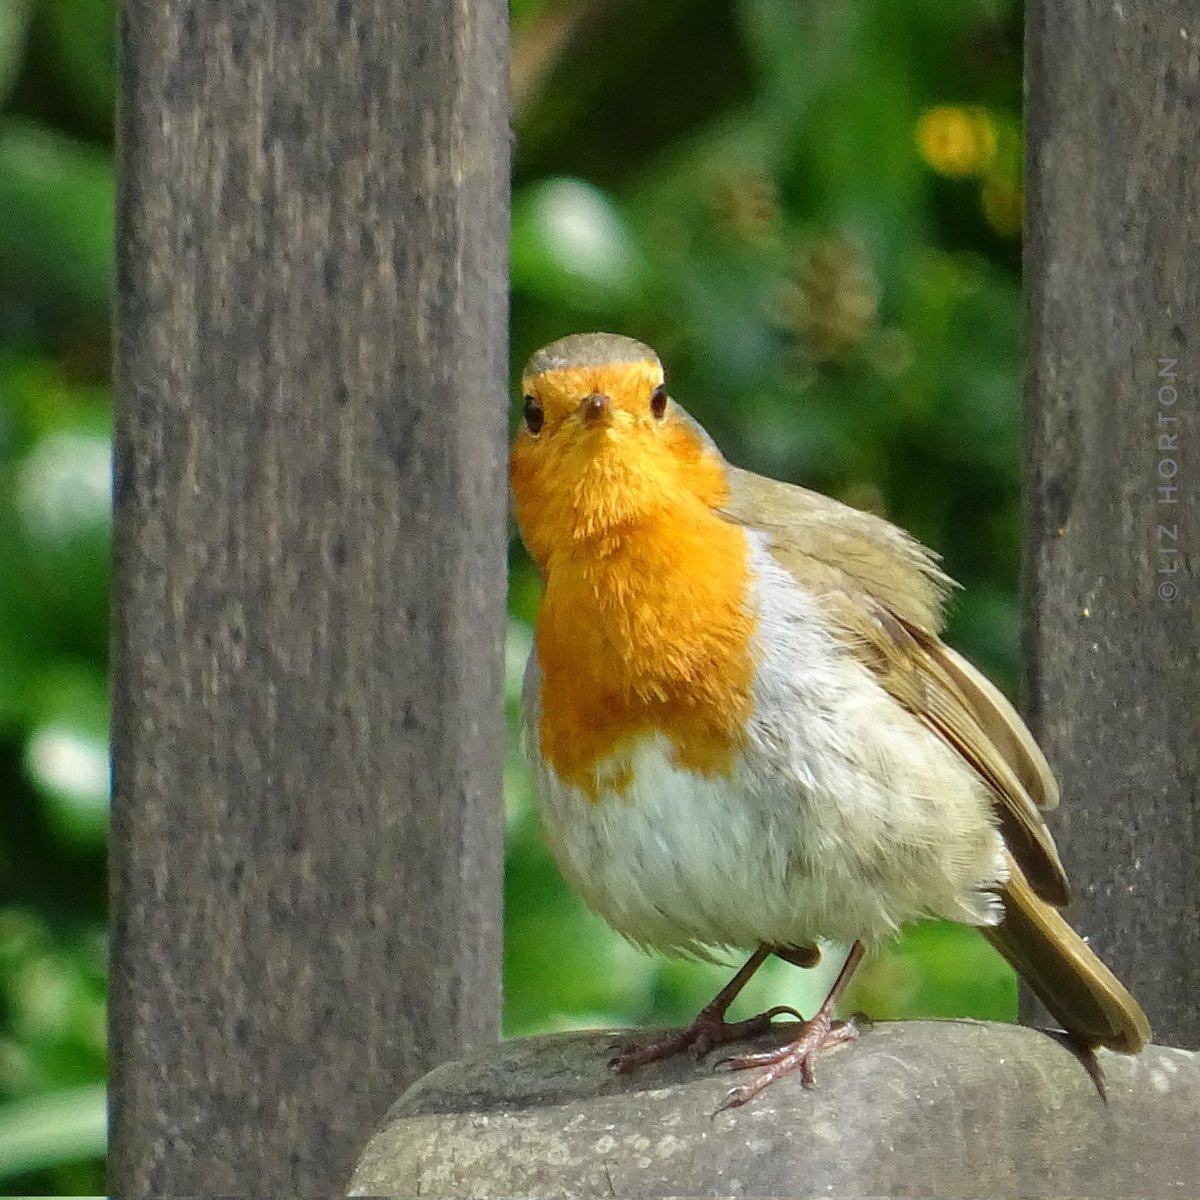 'Nothing in the world is quite as adorably lovely as a #Robin..' 🥰
Frances Hodgson Burnett #quote
#nature #wildlife #birds #photography
#birdwatching #birdphotography
#WildlifeWednesday
#BirdTwitter #joyful #birdtonic
Wishing you a lovely day..
#art #naturelovers .. 🌱🧡🕊